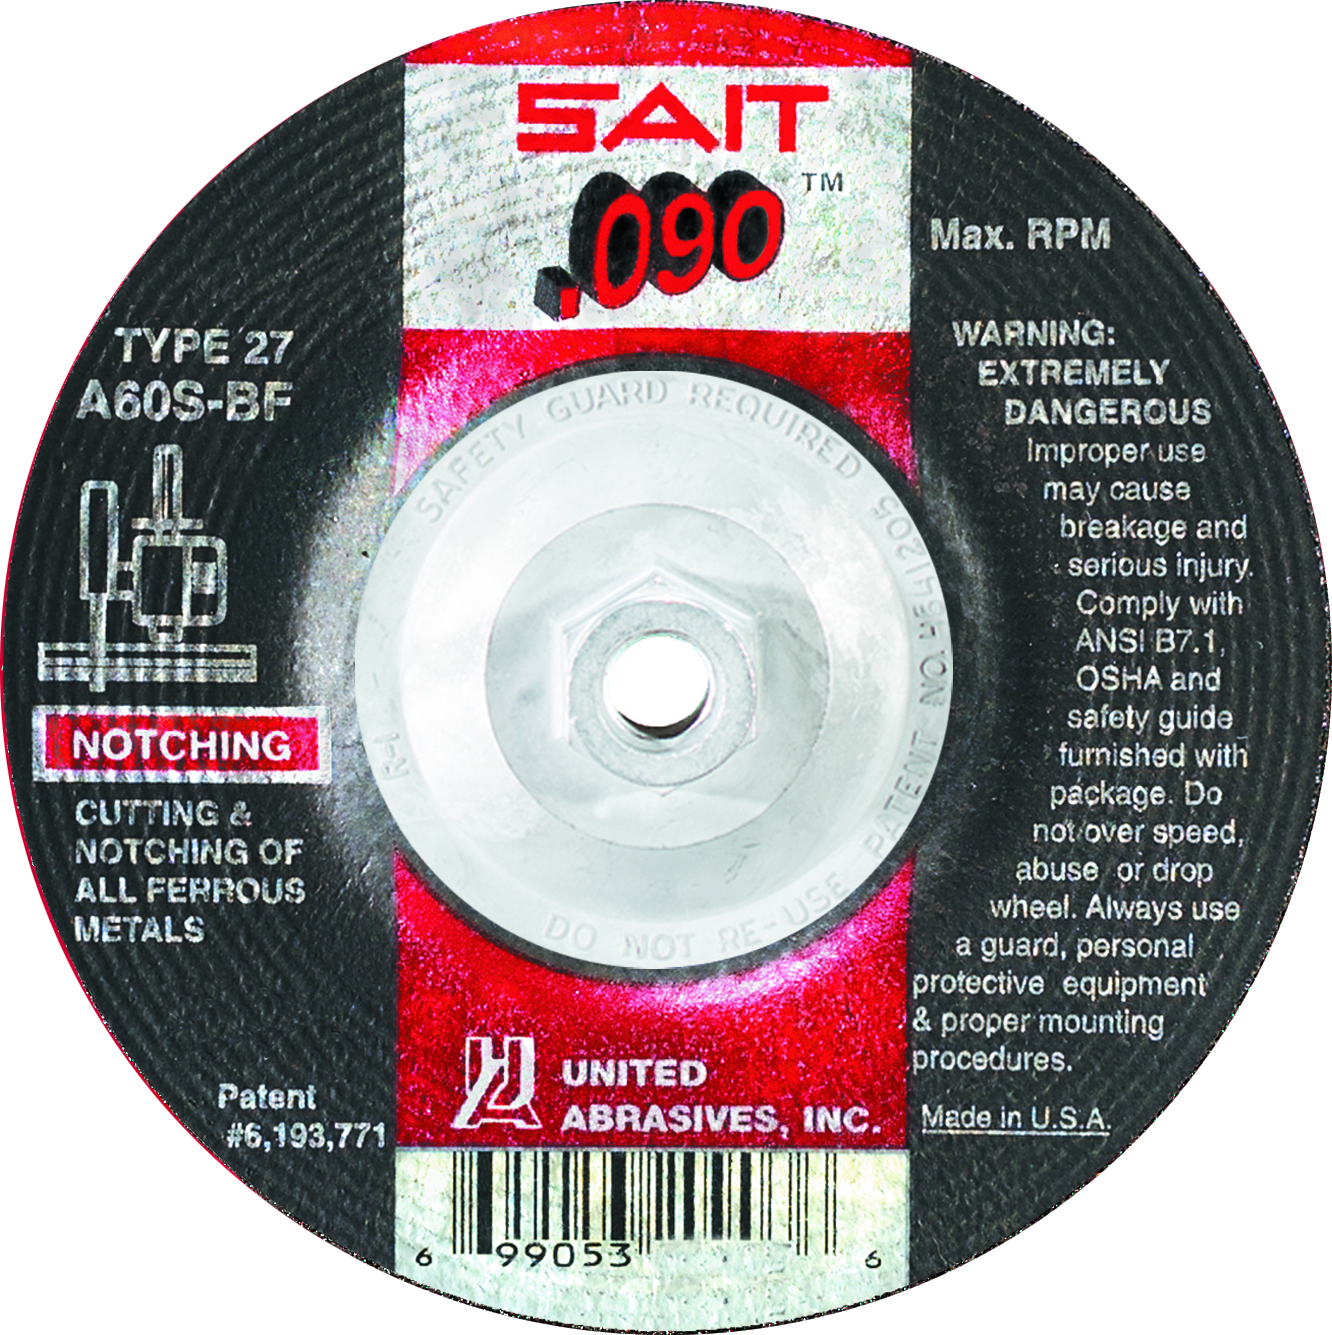 United Abrasives-Sait 20916 7in x .090in x 5/8-11 High Speed Cut-off Wheel for Metal (Box of 10) UNA-20916